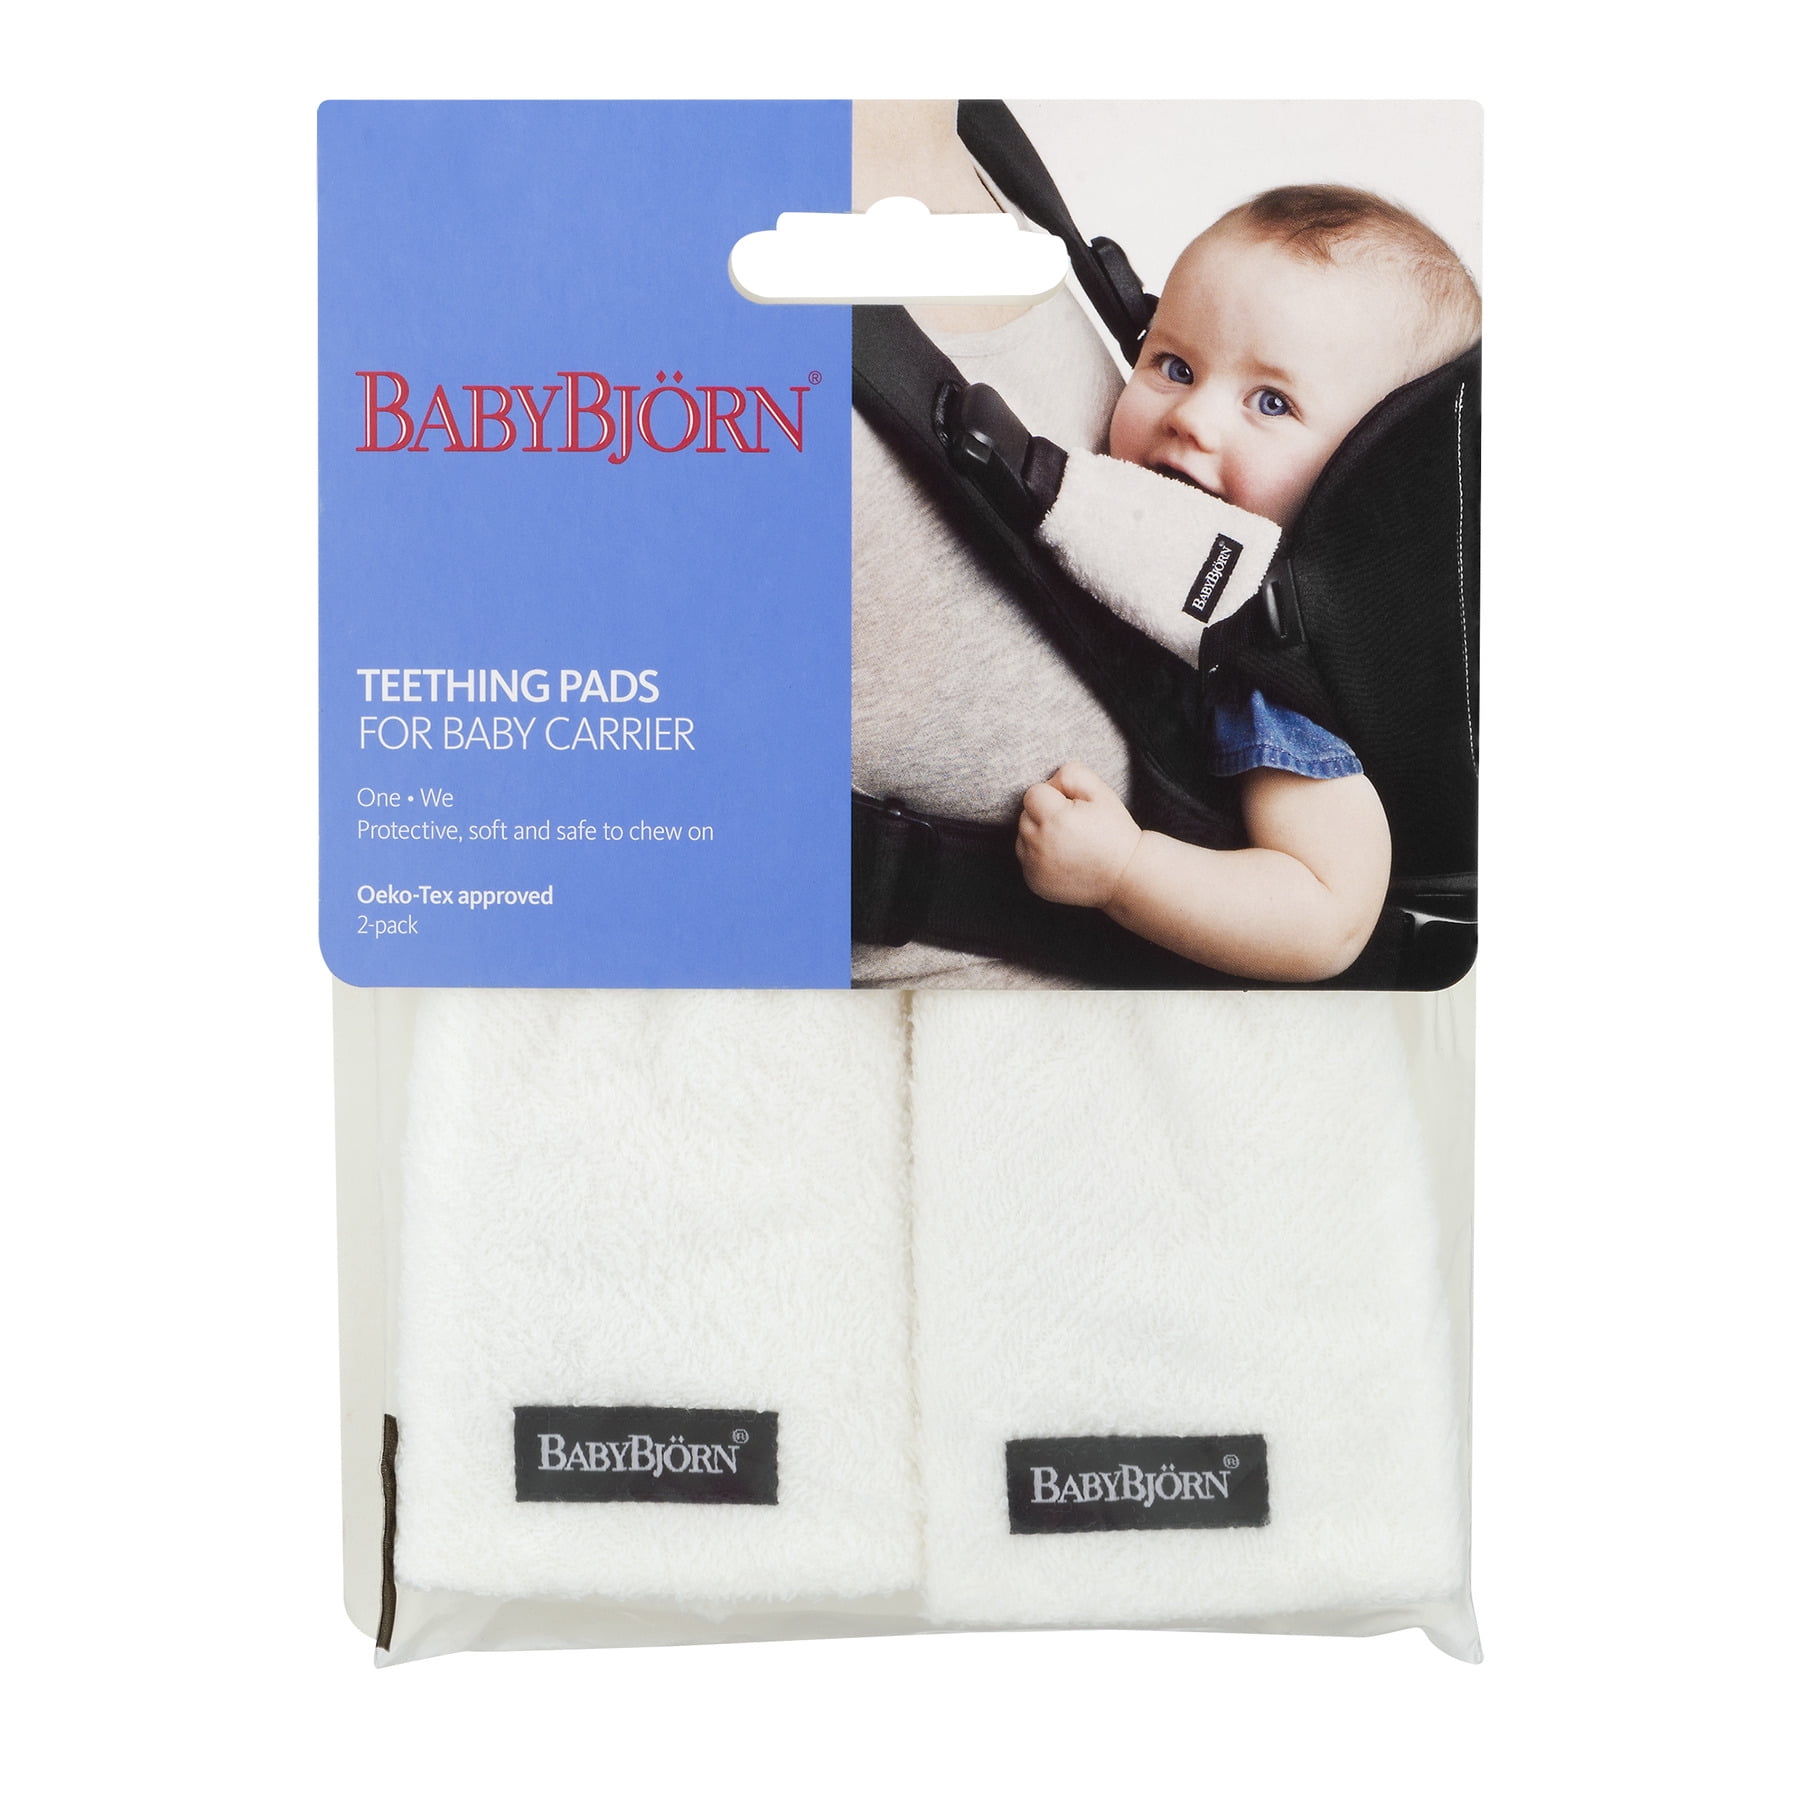 teething pads for baby carrier